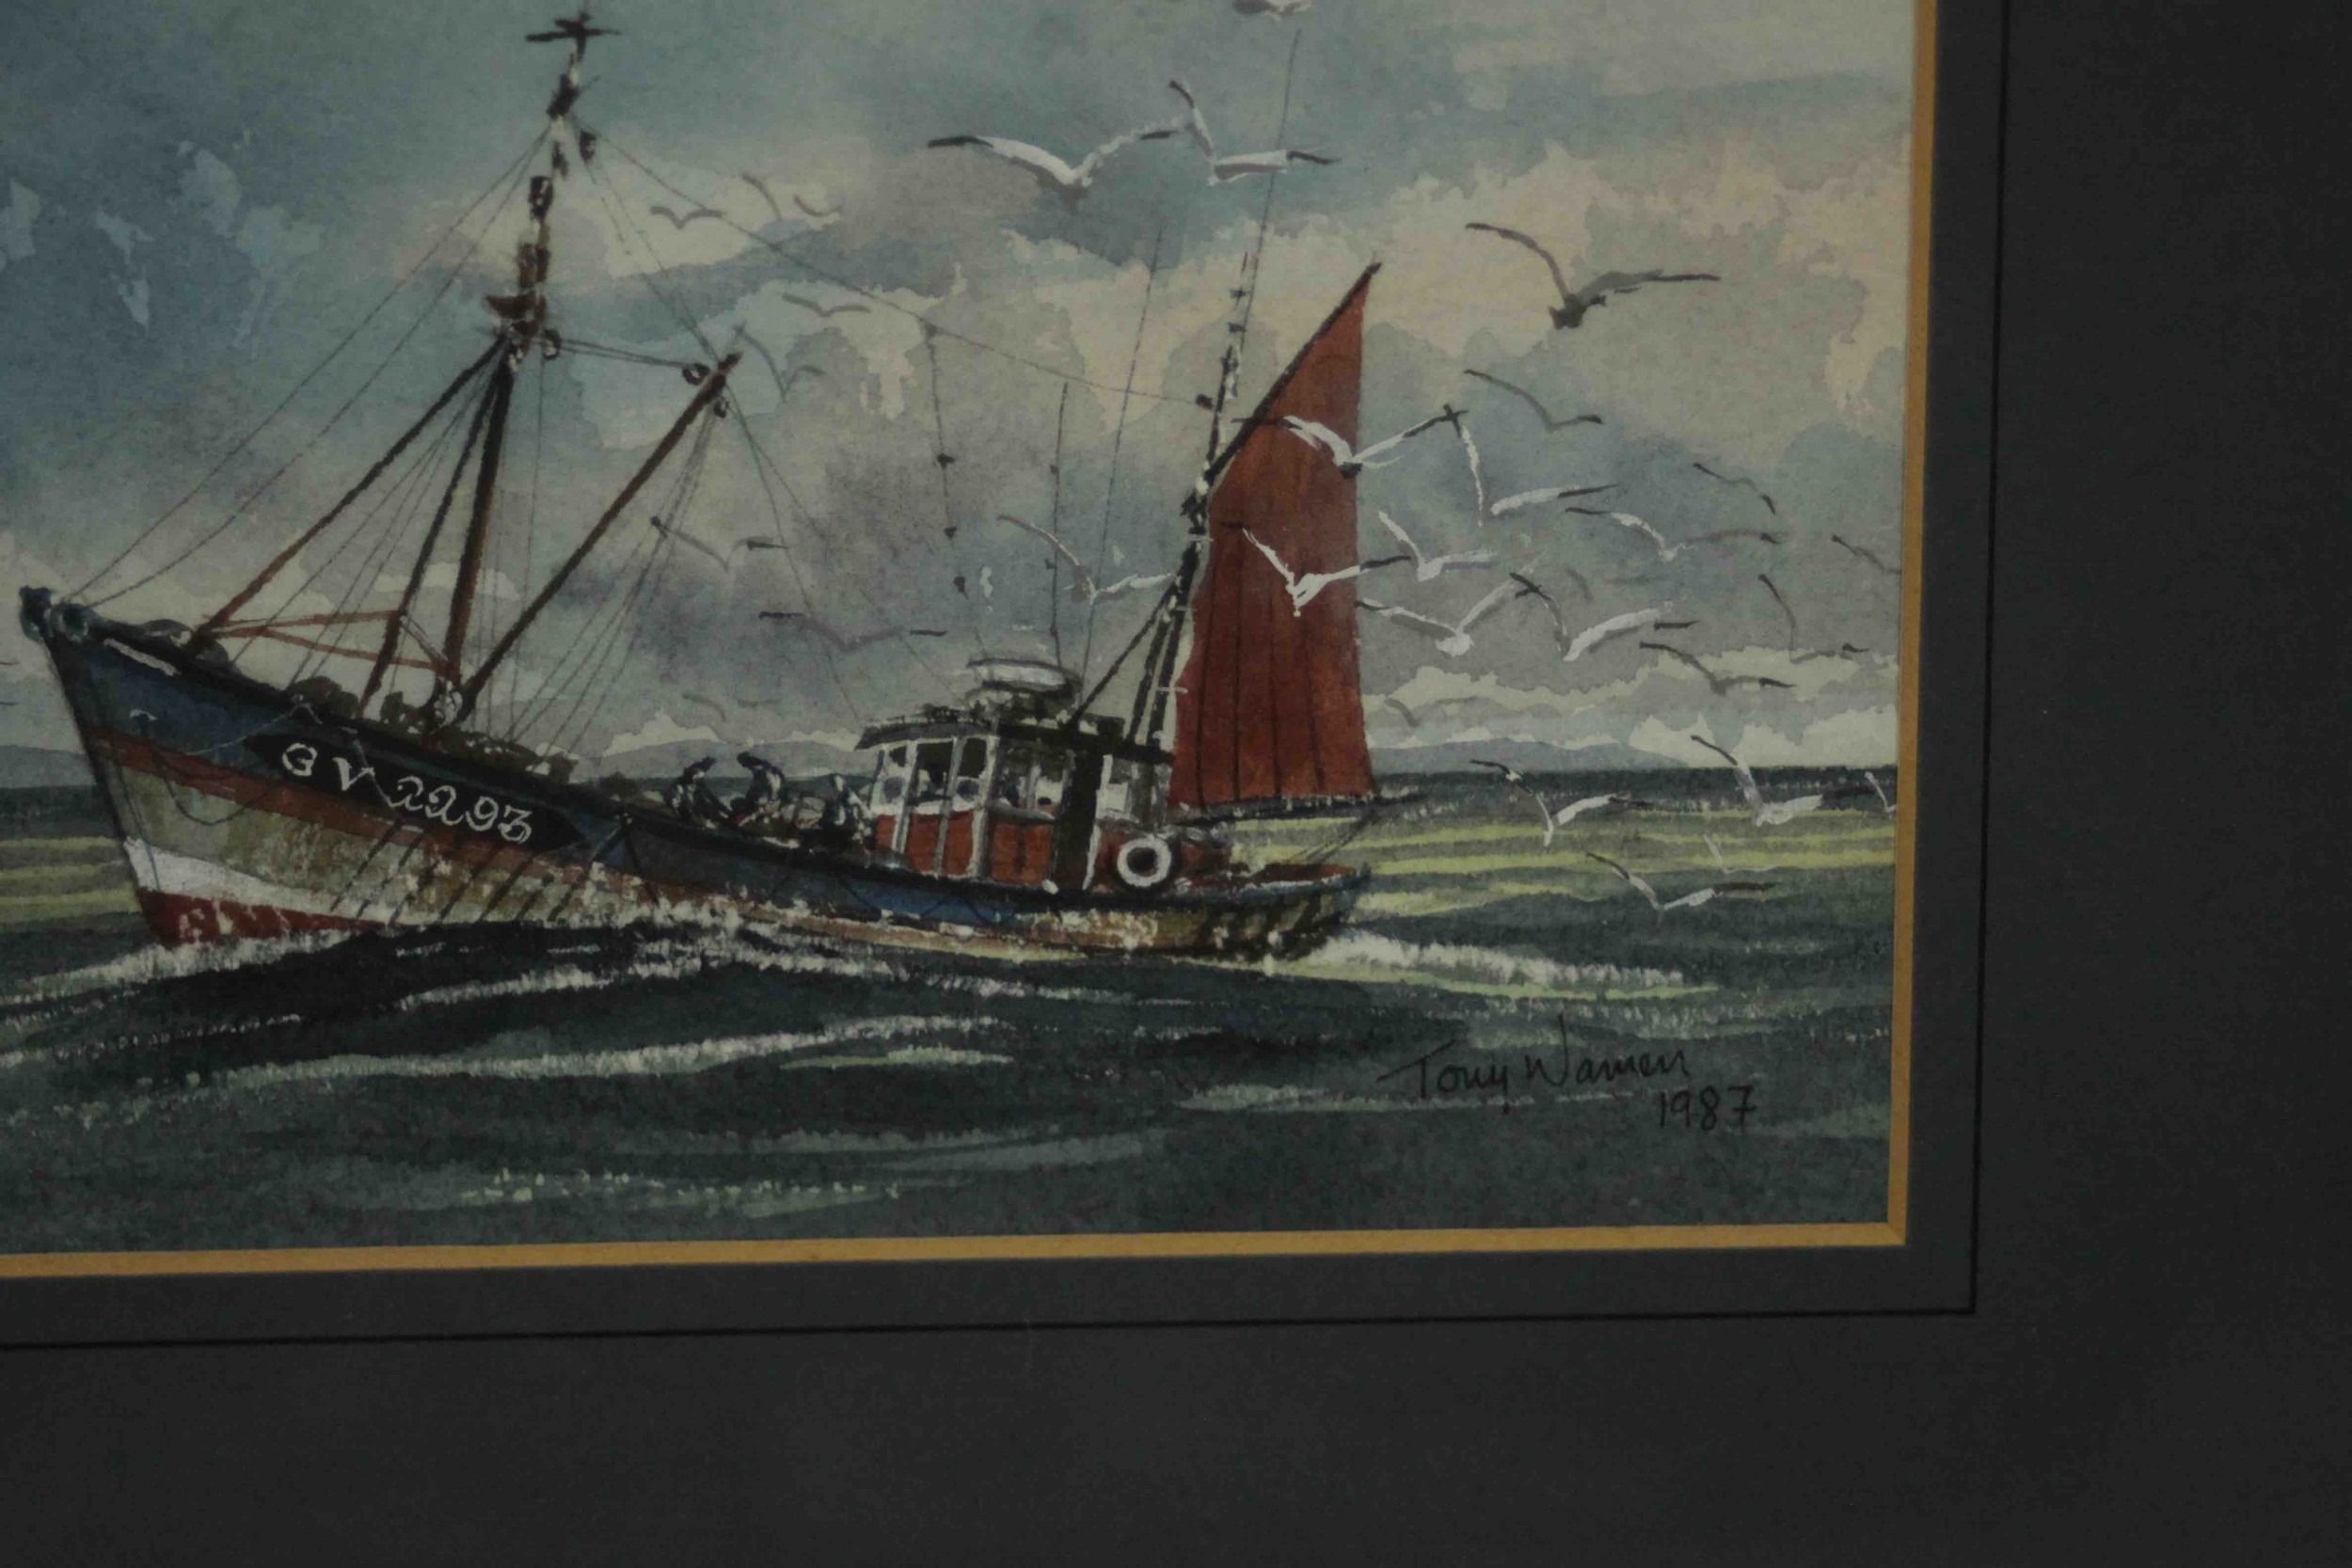 Tony Warren (1930-1994), two studies of sailing ships, watercolours, signed and dated 1987 lower - Image 4 of 8